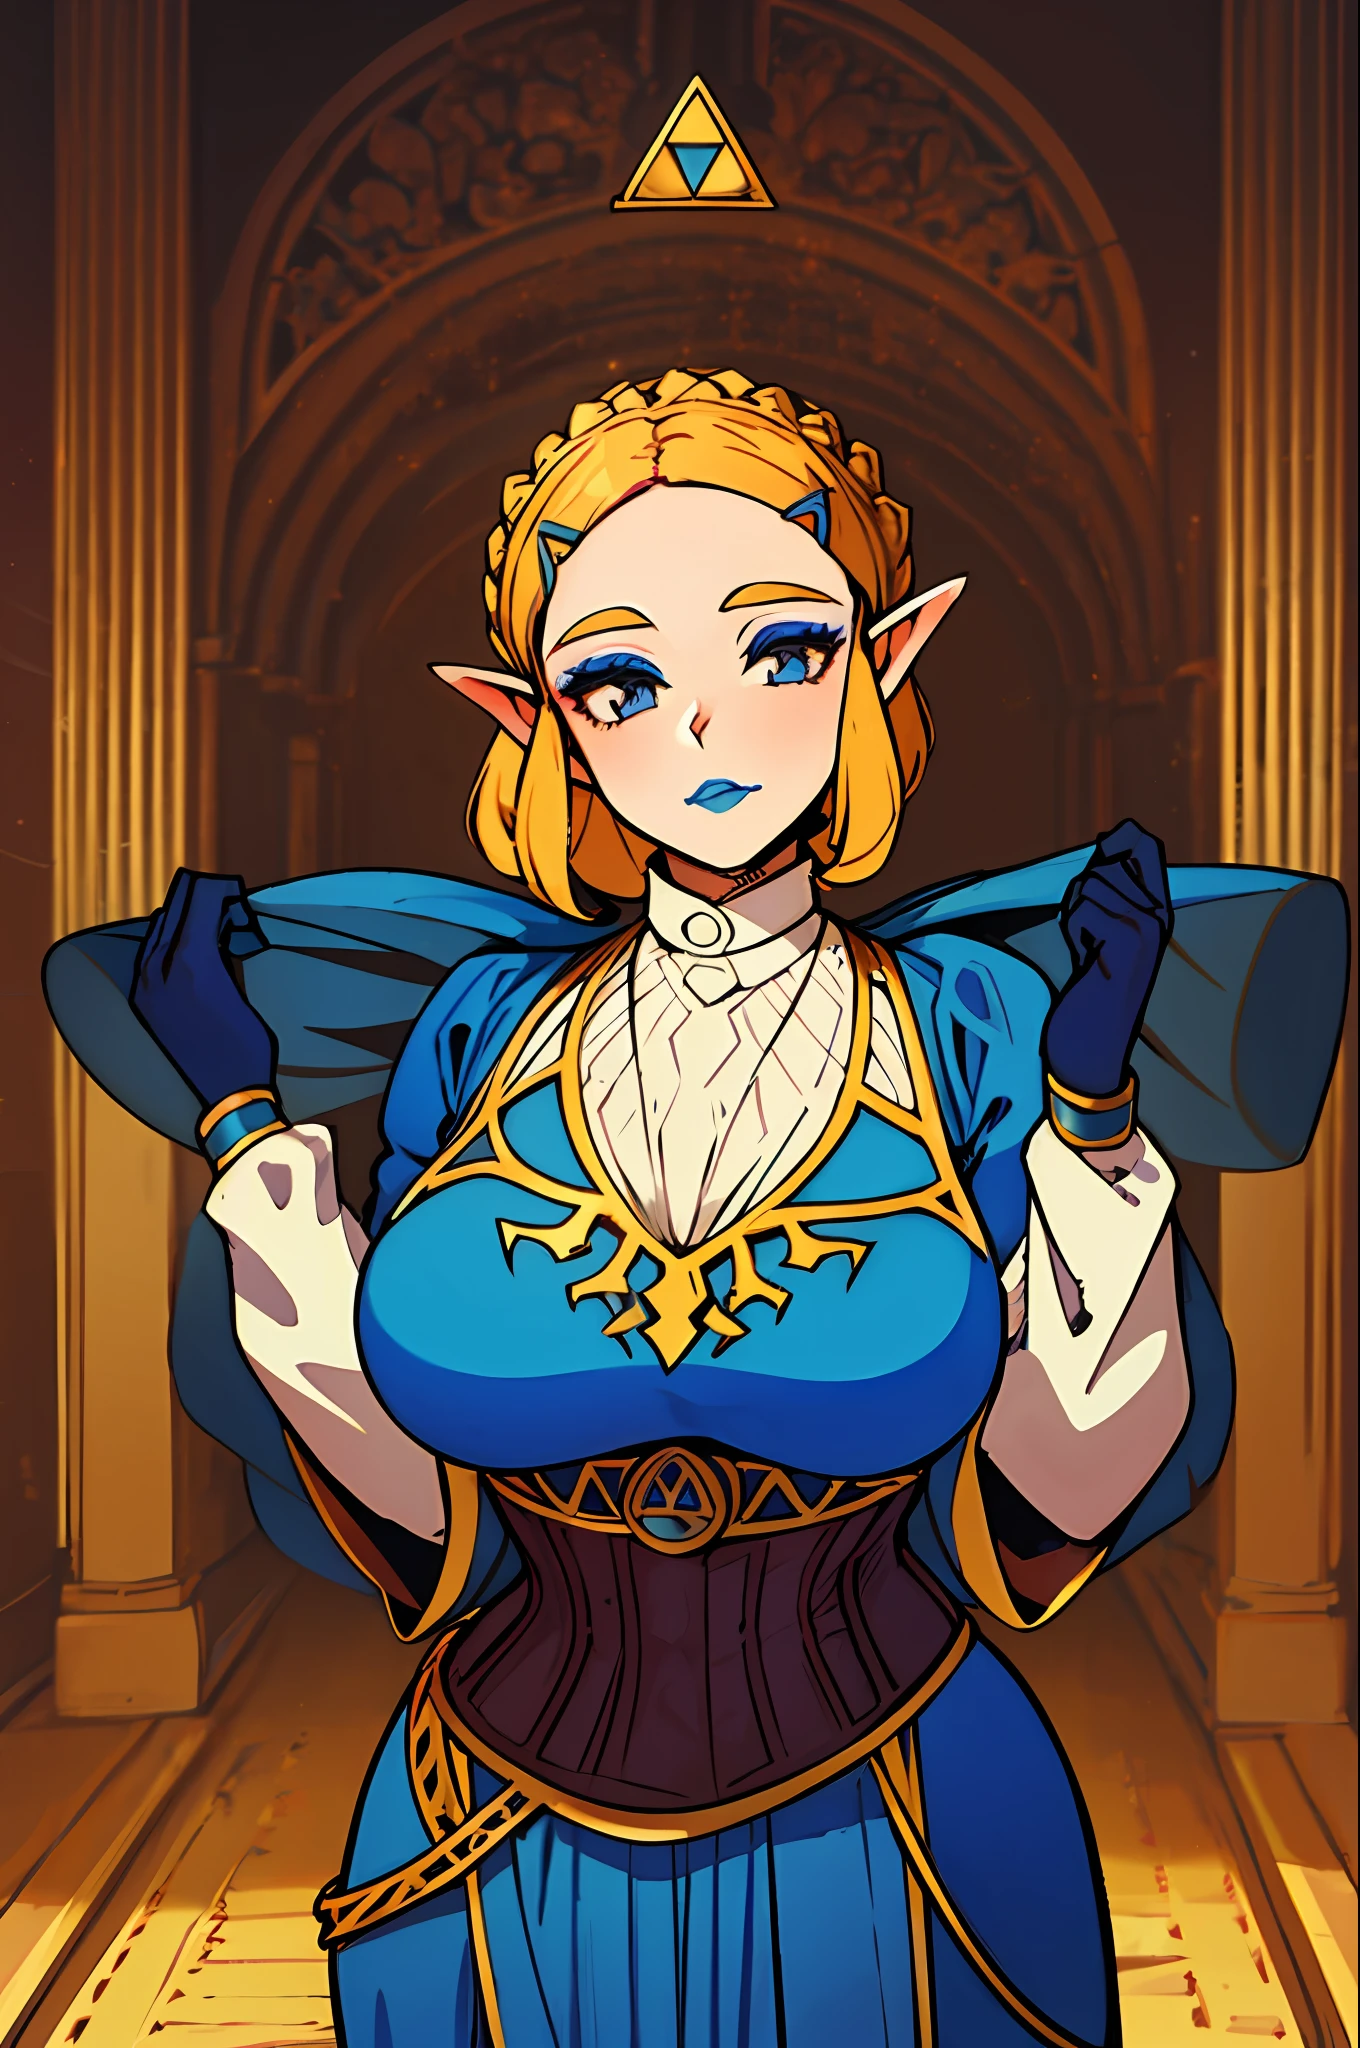 Queen in a royal blue dress standing in a Castle Hall, queen zelda, breath of the wild art style, queen zelda, botw style, zelda with triforce, wearing crown, heavy blue lipstick, Queen Dress, Tapered Dress with corset, Banquet Dress, Queen fancy Makeup, large fancy wide-cuff gloves, white cuff gloves with gold trim, queen crown, wide queen crown